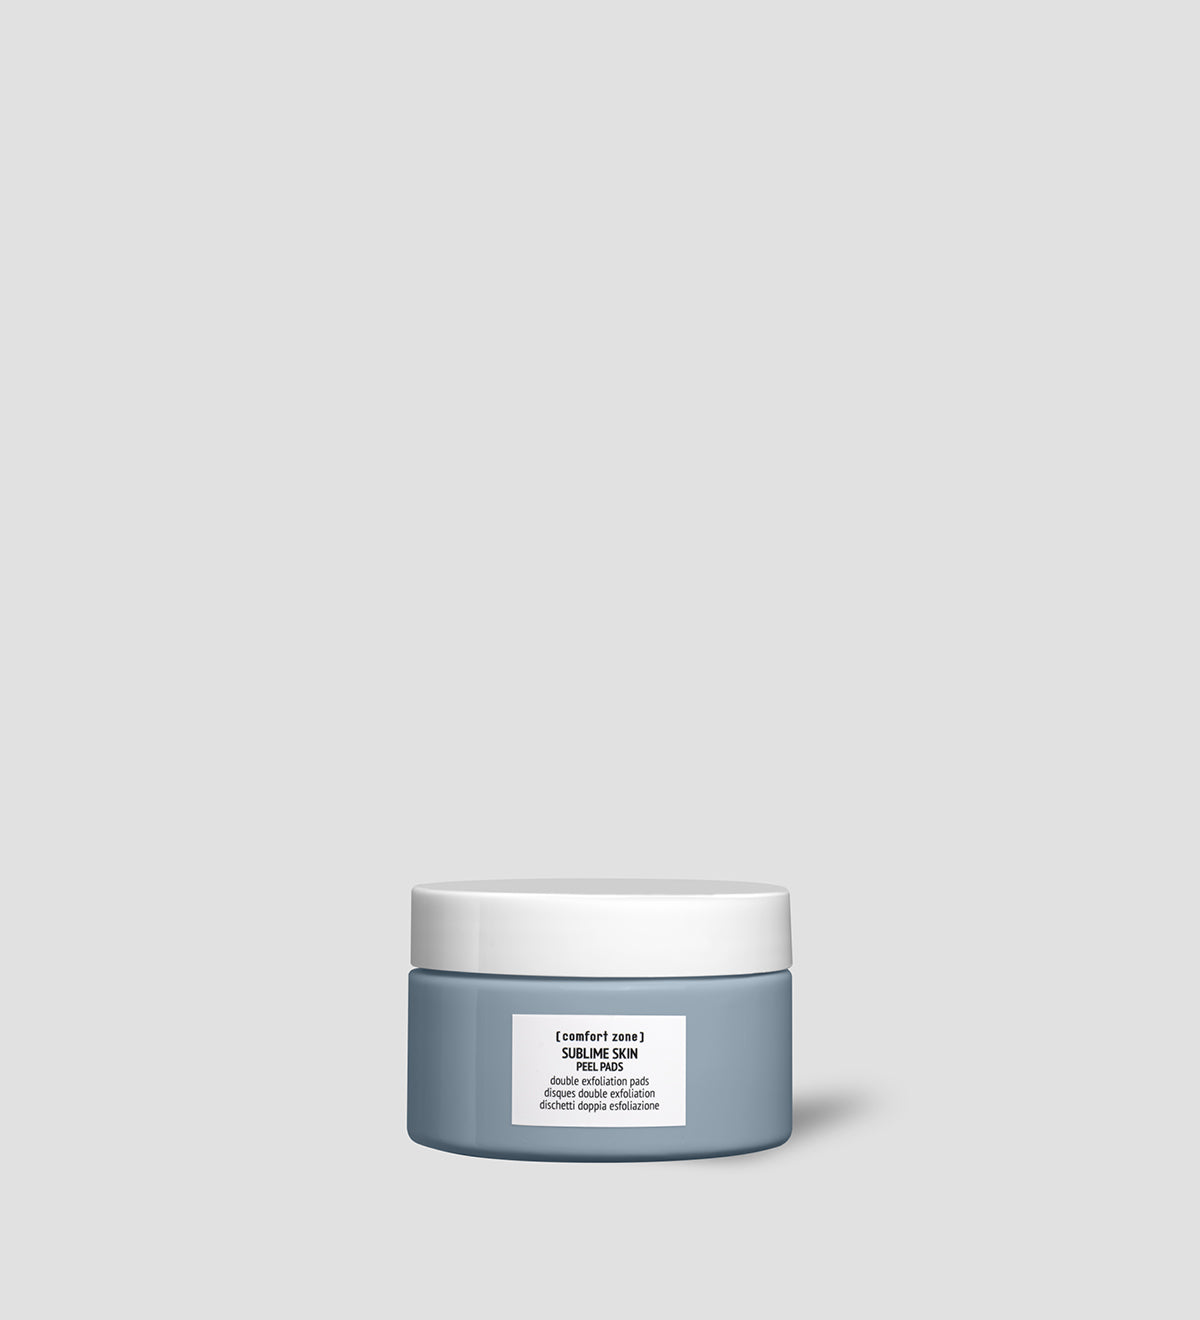 Comfort Zone: SUBLIME SKIN Sublime Skin Peel Pads Double exfoliation pads-
